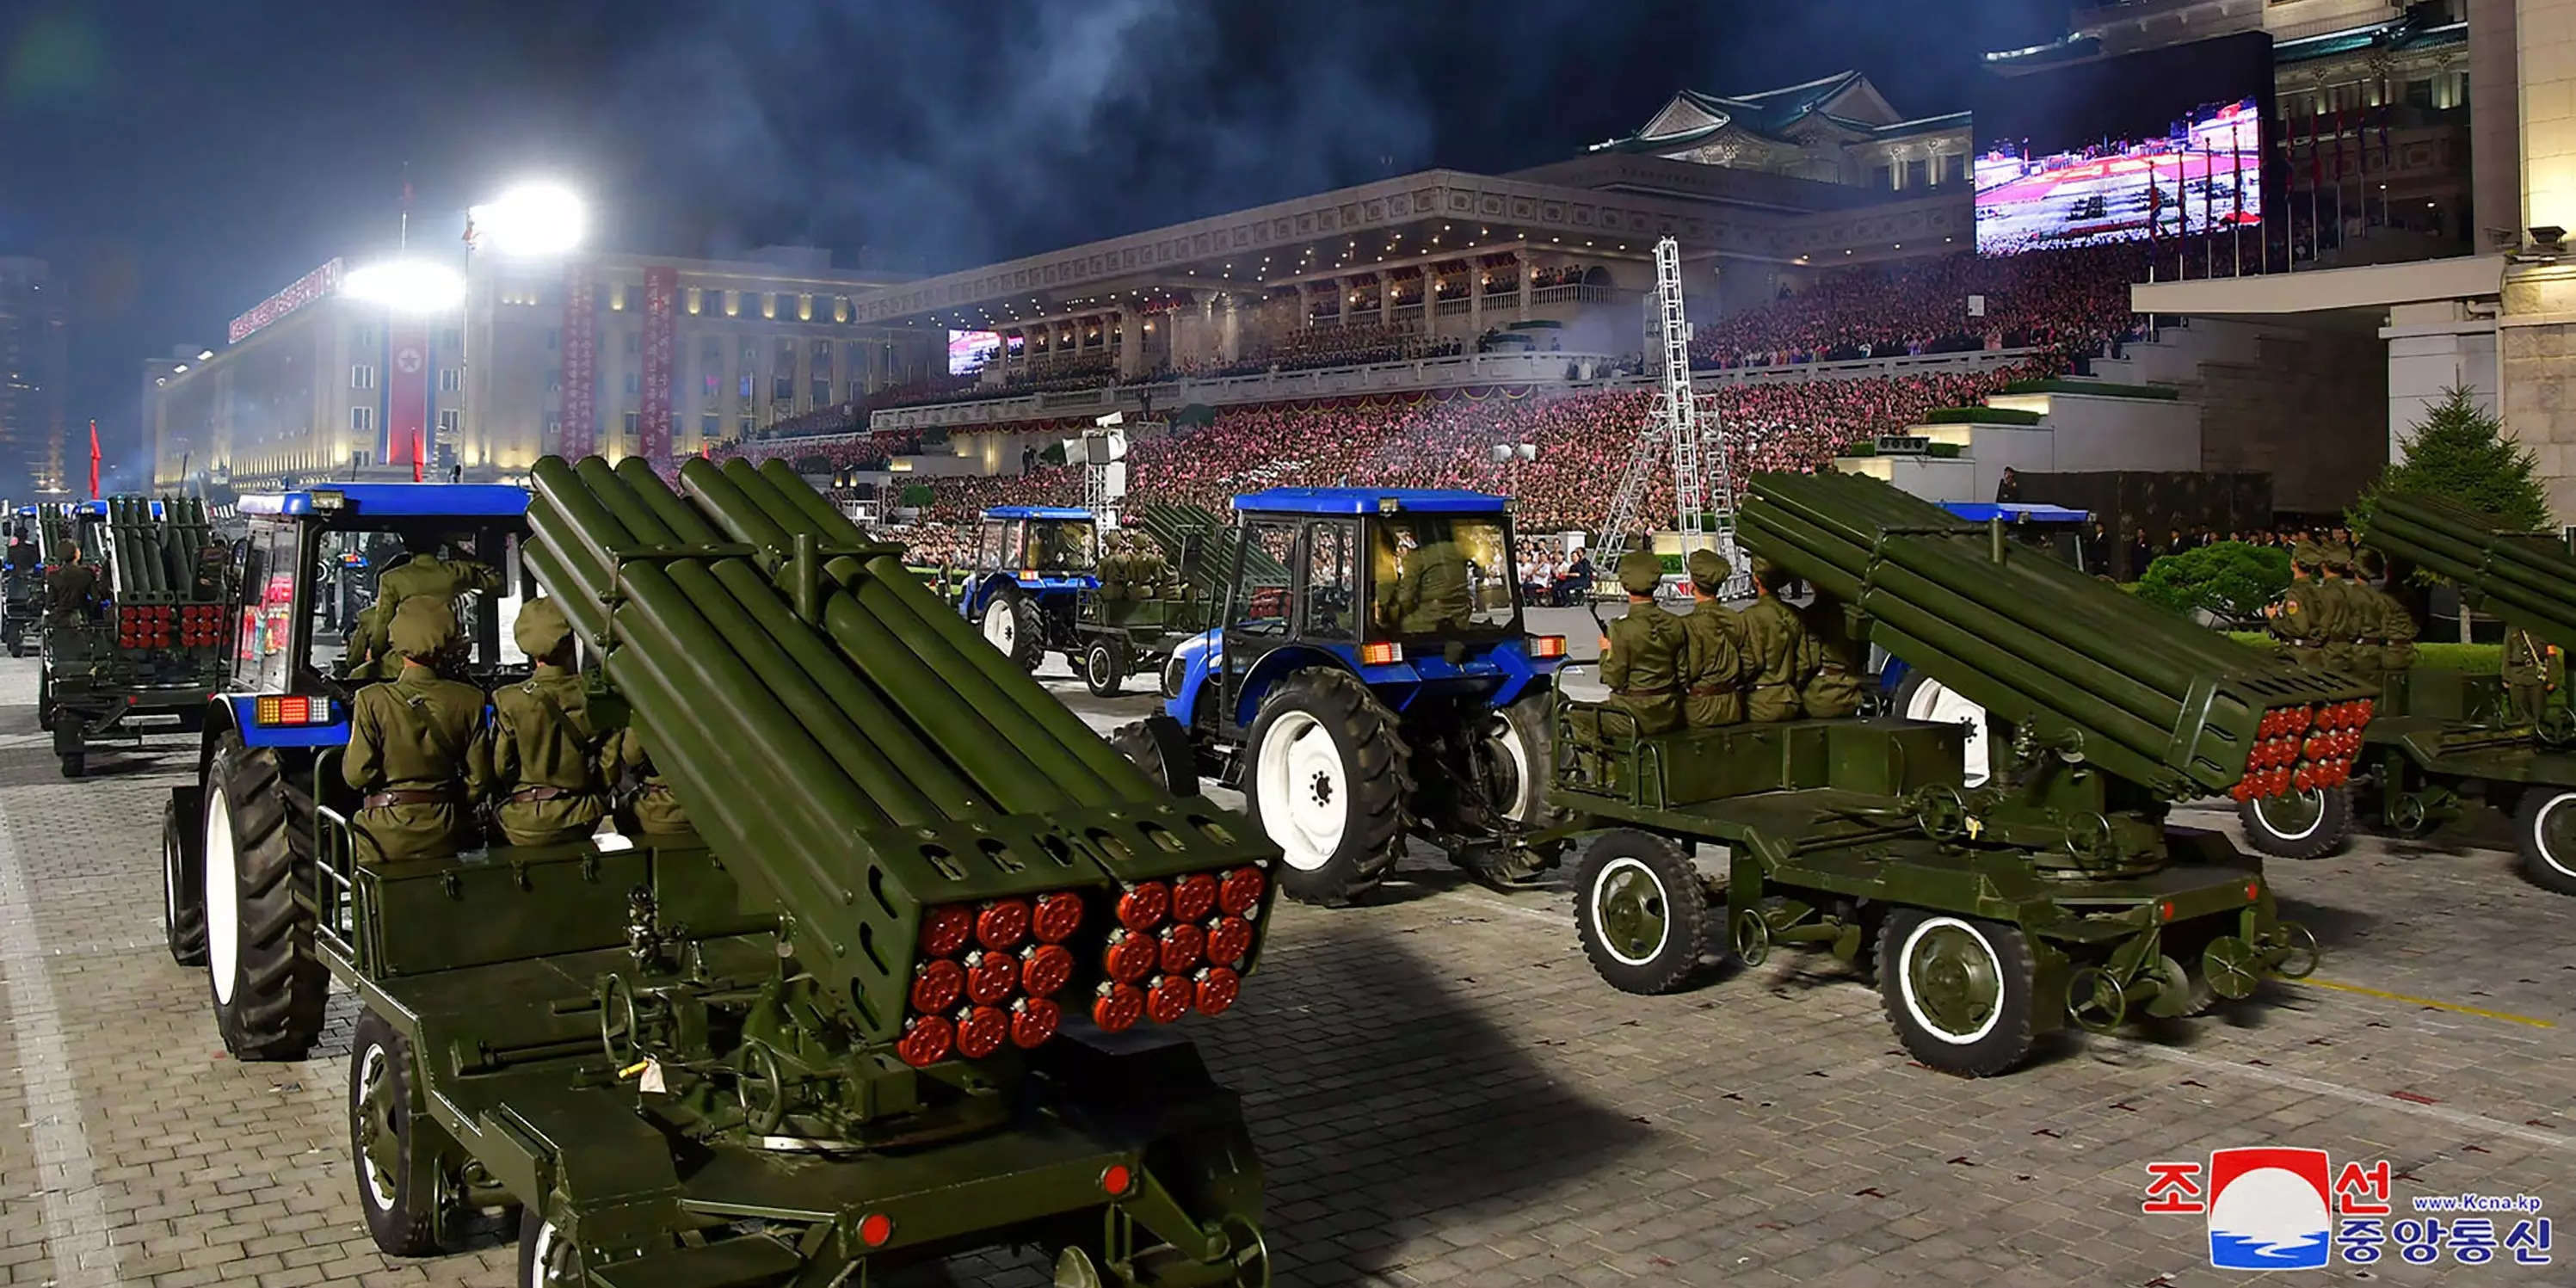 North Korea Displays Tractor-Turned-Missile Launchers at Military Parade